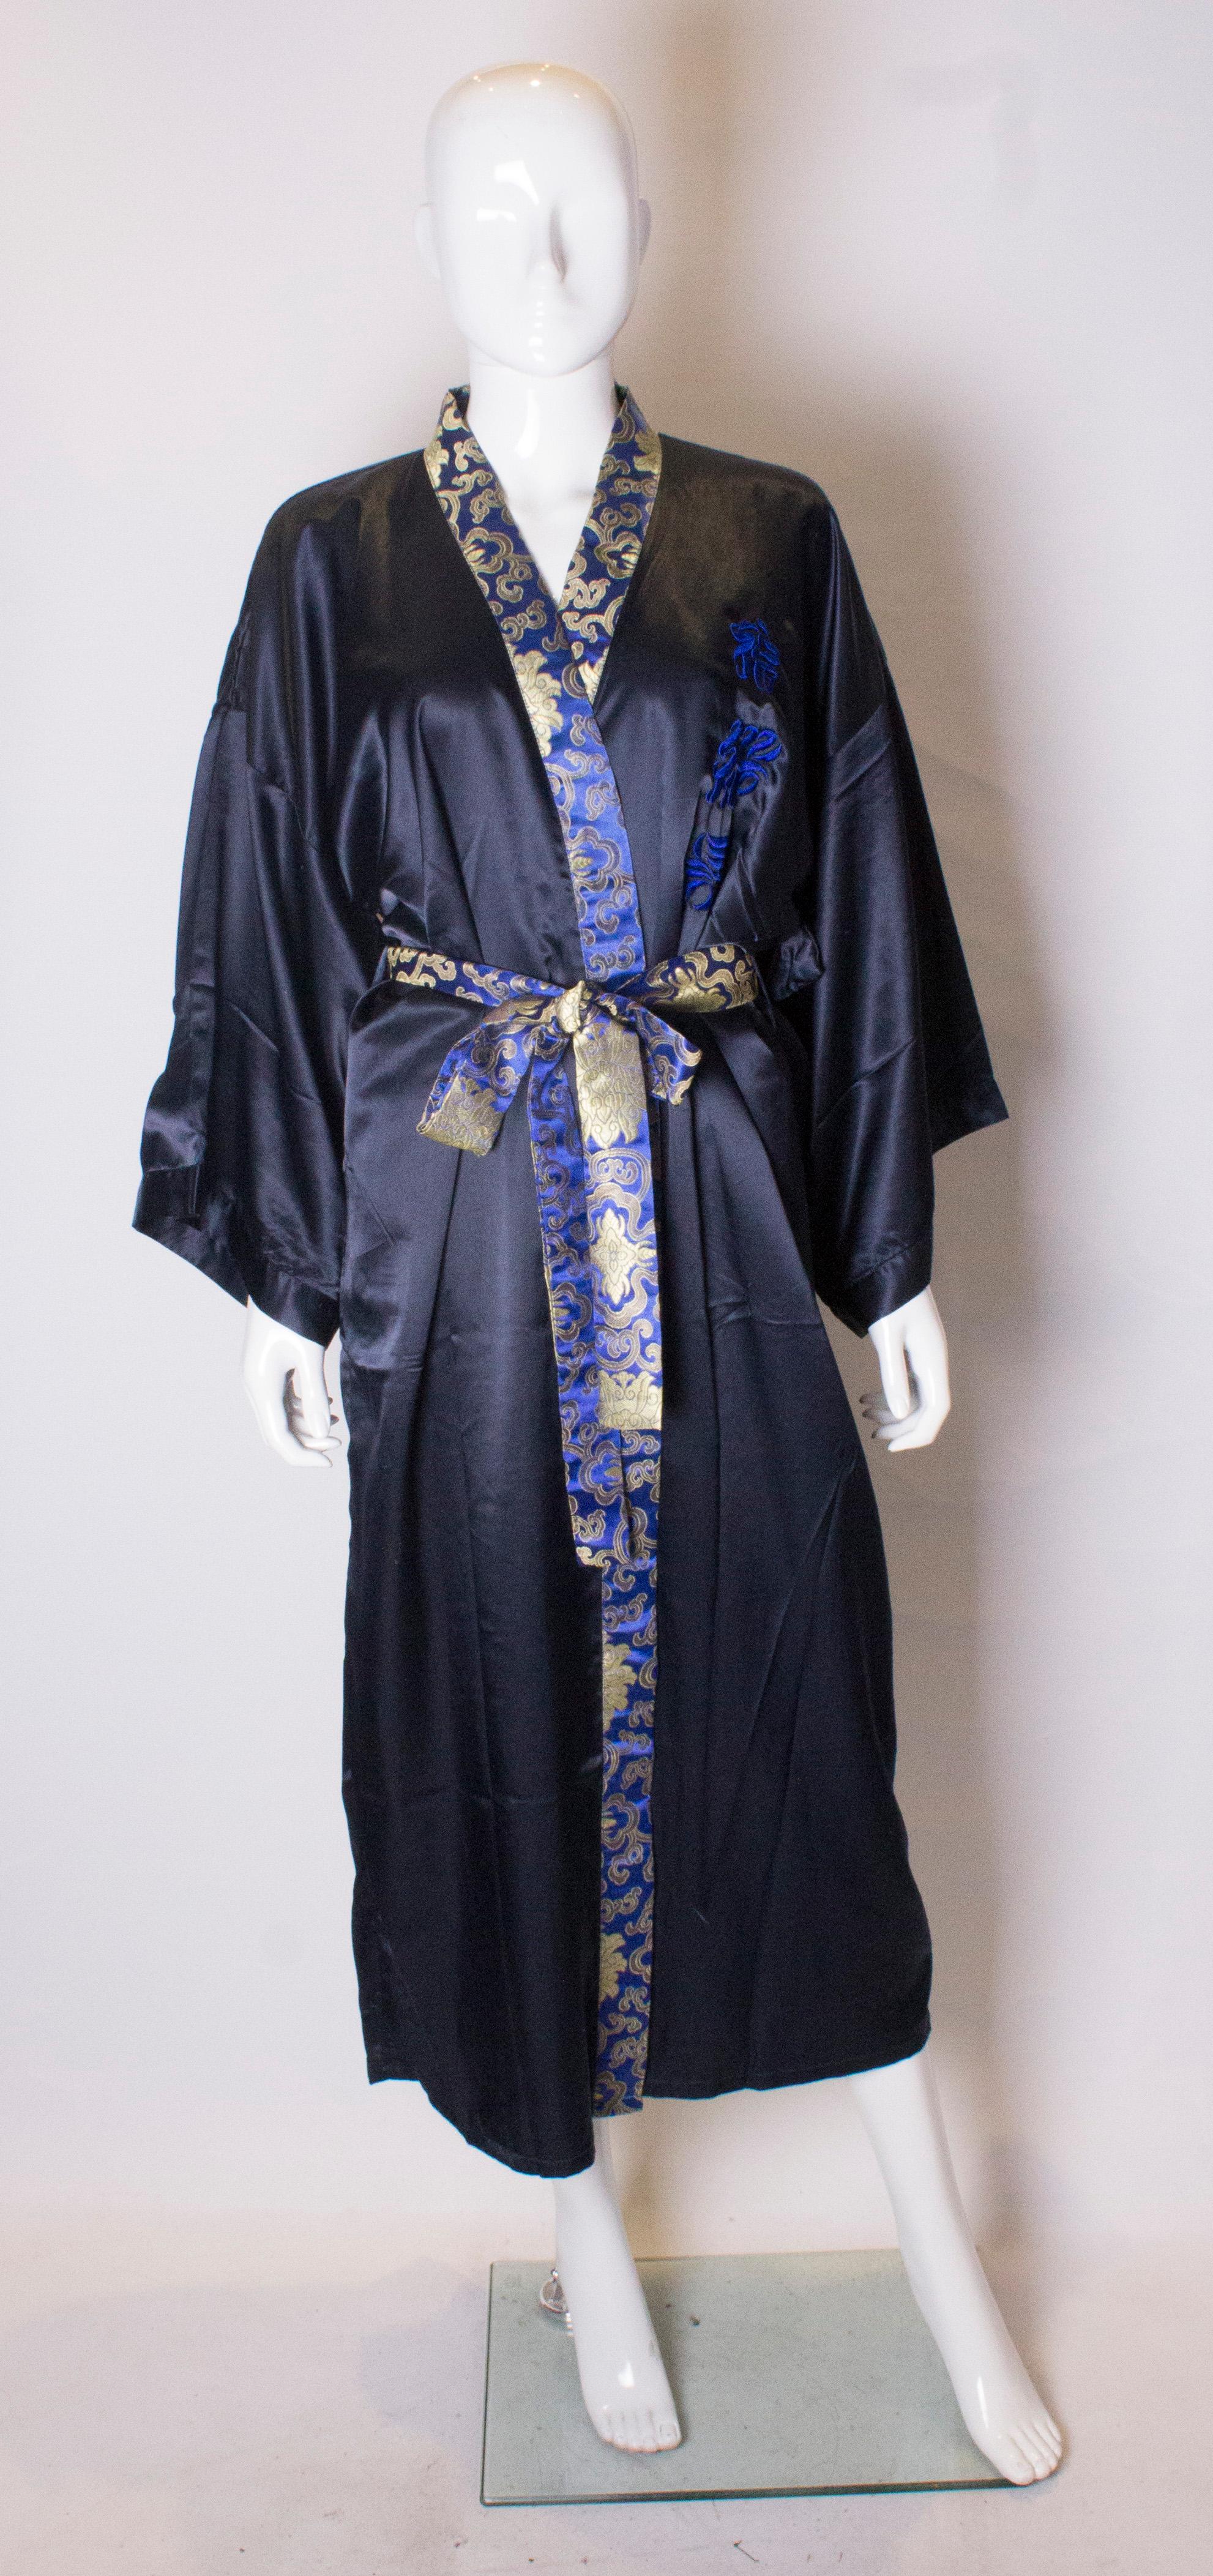 A beautiful blue silk vintage dressing gown. The gown is a wonderful shade of blue with wonderful peacock embroidery on the back. It is fully lined, trimmed in printed silk and has a belt in the same fabric and embroidered letters on the front.